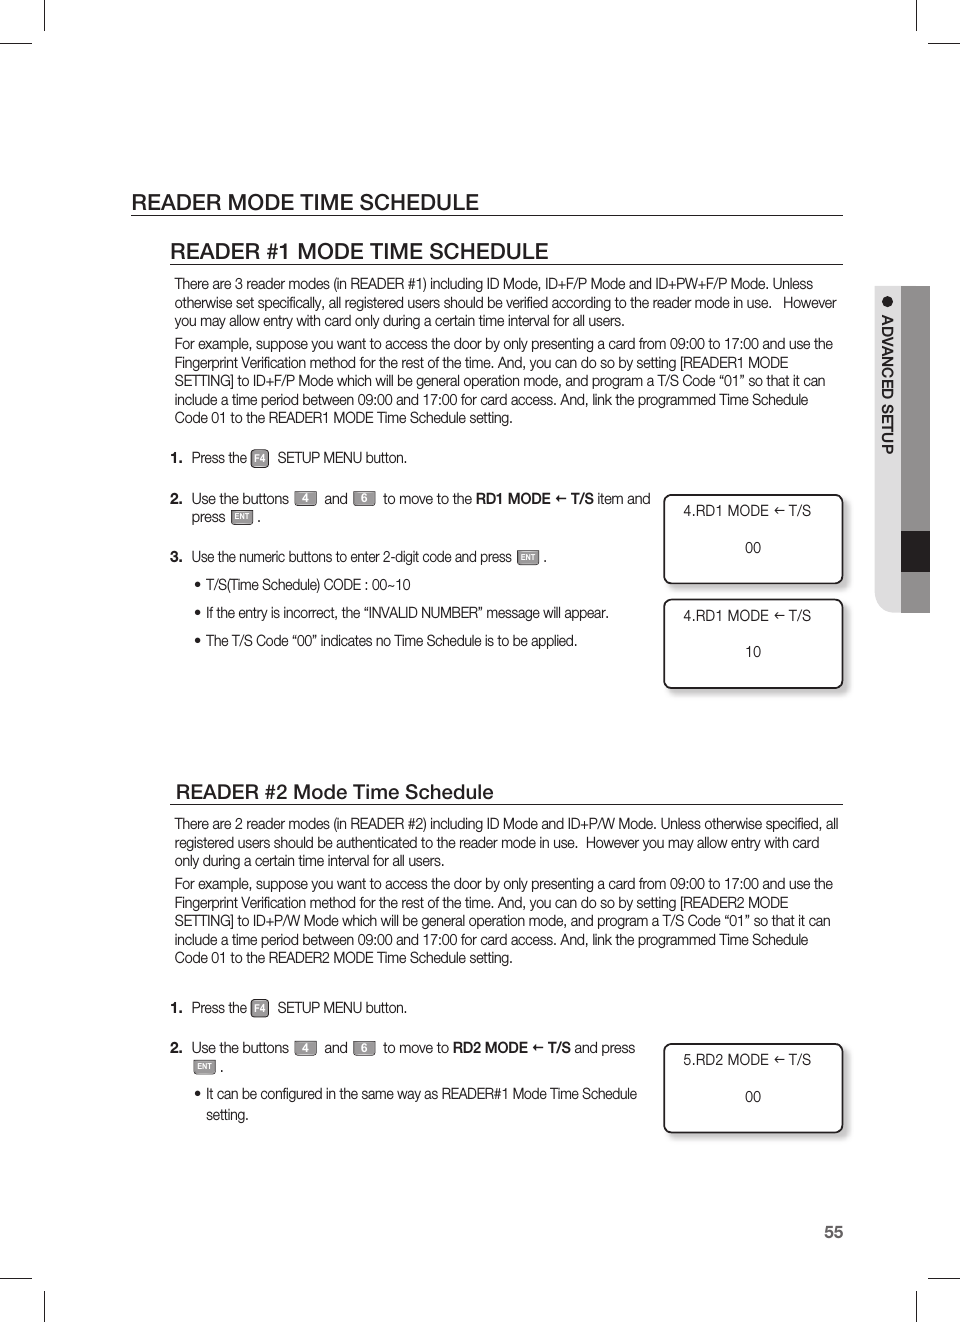 English55ADVANCED SETUPREADER MODE TIME SCHEDULEREADER #1 MODE TIME SCHEDULEThere are 3 reader modes (in READER #1) including ID Mode, ID+F/P Mode and ID+PW+F/P Mode. Unless otherwise set speciﬁ cally, all registered users should be veriﬁ ed according to the reader mode in use.   However you may allow entry with card only during a certain time interval for all users.For example, suppose you want to access the door by only presenting a card from 09:00 to 17:00 and use the Fingerprint Veriﬁ cation method for the rest of the time. And, you can do so by setting [READER1 MODE SETTING] to ID+F/P Mode which will be general operation mode, and program a T/S Code “01” so that it can include a time period between 09:00 and 17:00 for card access. And, link the programmed Time Schedule Code 01 to the READER1 MODE Time Schedule setting.Press the F4 SETUP MENU button.Use the buttons 4 and 6 to move to the RD1 MODE  T/S item and press ENT.Use the numeric buttons to enter 2-digit code and press ENT.T/S(Time Schedule) CODE : 00~10If the entry is incorrect, the “INVALID NUMBER” message will appear.The T/S Code “00” indicates no Time Schedule is to be applied. READER #2 Mode Time ScheduleThere are 2 reader modes (in READER #2) including ID Mode and ID+P/W Mode. Unless otherwise speciﬁ ed, all registered users should be authenticated to the reader mode in use.  However you may allow entry with card only during a certain time interval for all users.For example, suppose you want to access the door by only presenting a card from 09:00 to 17:00 and use the Fingerprint Veriﬁ cation method for the rest of the time. And, you can do so by setting [READER2 MODE SETTING] to ID+P/W Mode which will be general operation mode, and program a T/S Code “01” so that it can include a time period between 09:00 and 17:00 for card access. And, link the programmed Time Schedule Code 01 to the READER2 MODE Time Schedule setting.Press the F4 SETUP MENU button.Use the buttons 4 and 6 to move to RD2 MODE  T/S and press ENT.It can be conﬁ gured in the same way as READER#1 Mode Time Schedule setting.1.2.3.•••1.2.•5.RD2 MODE I T/S004.RD1 MODE I T/S004.RD1 MODE I T/S10